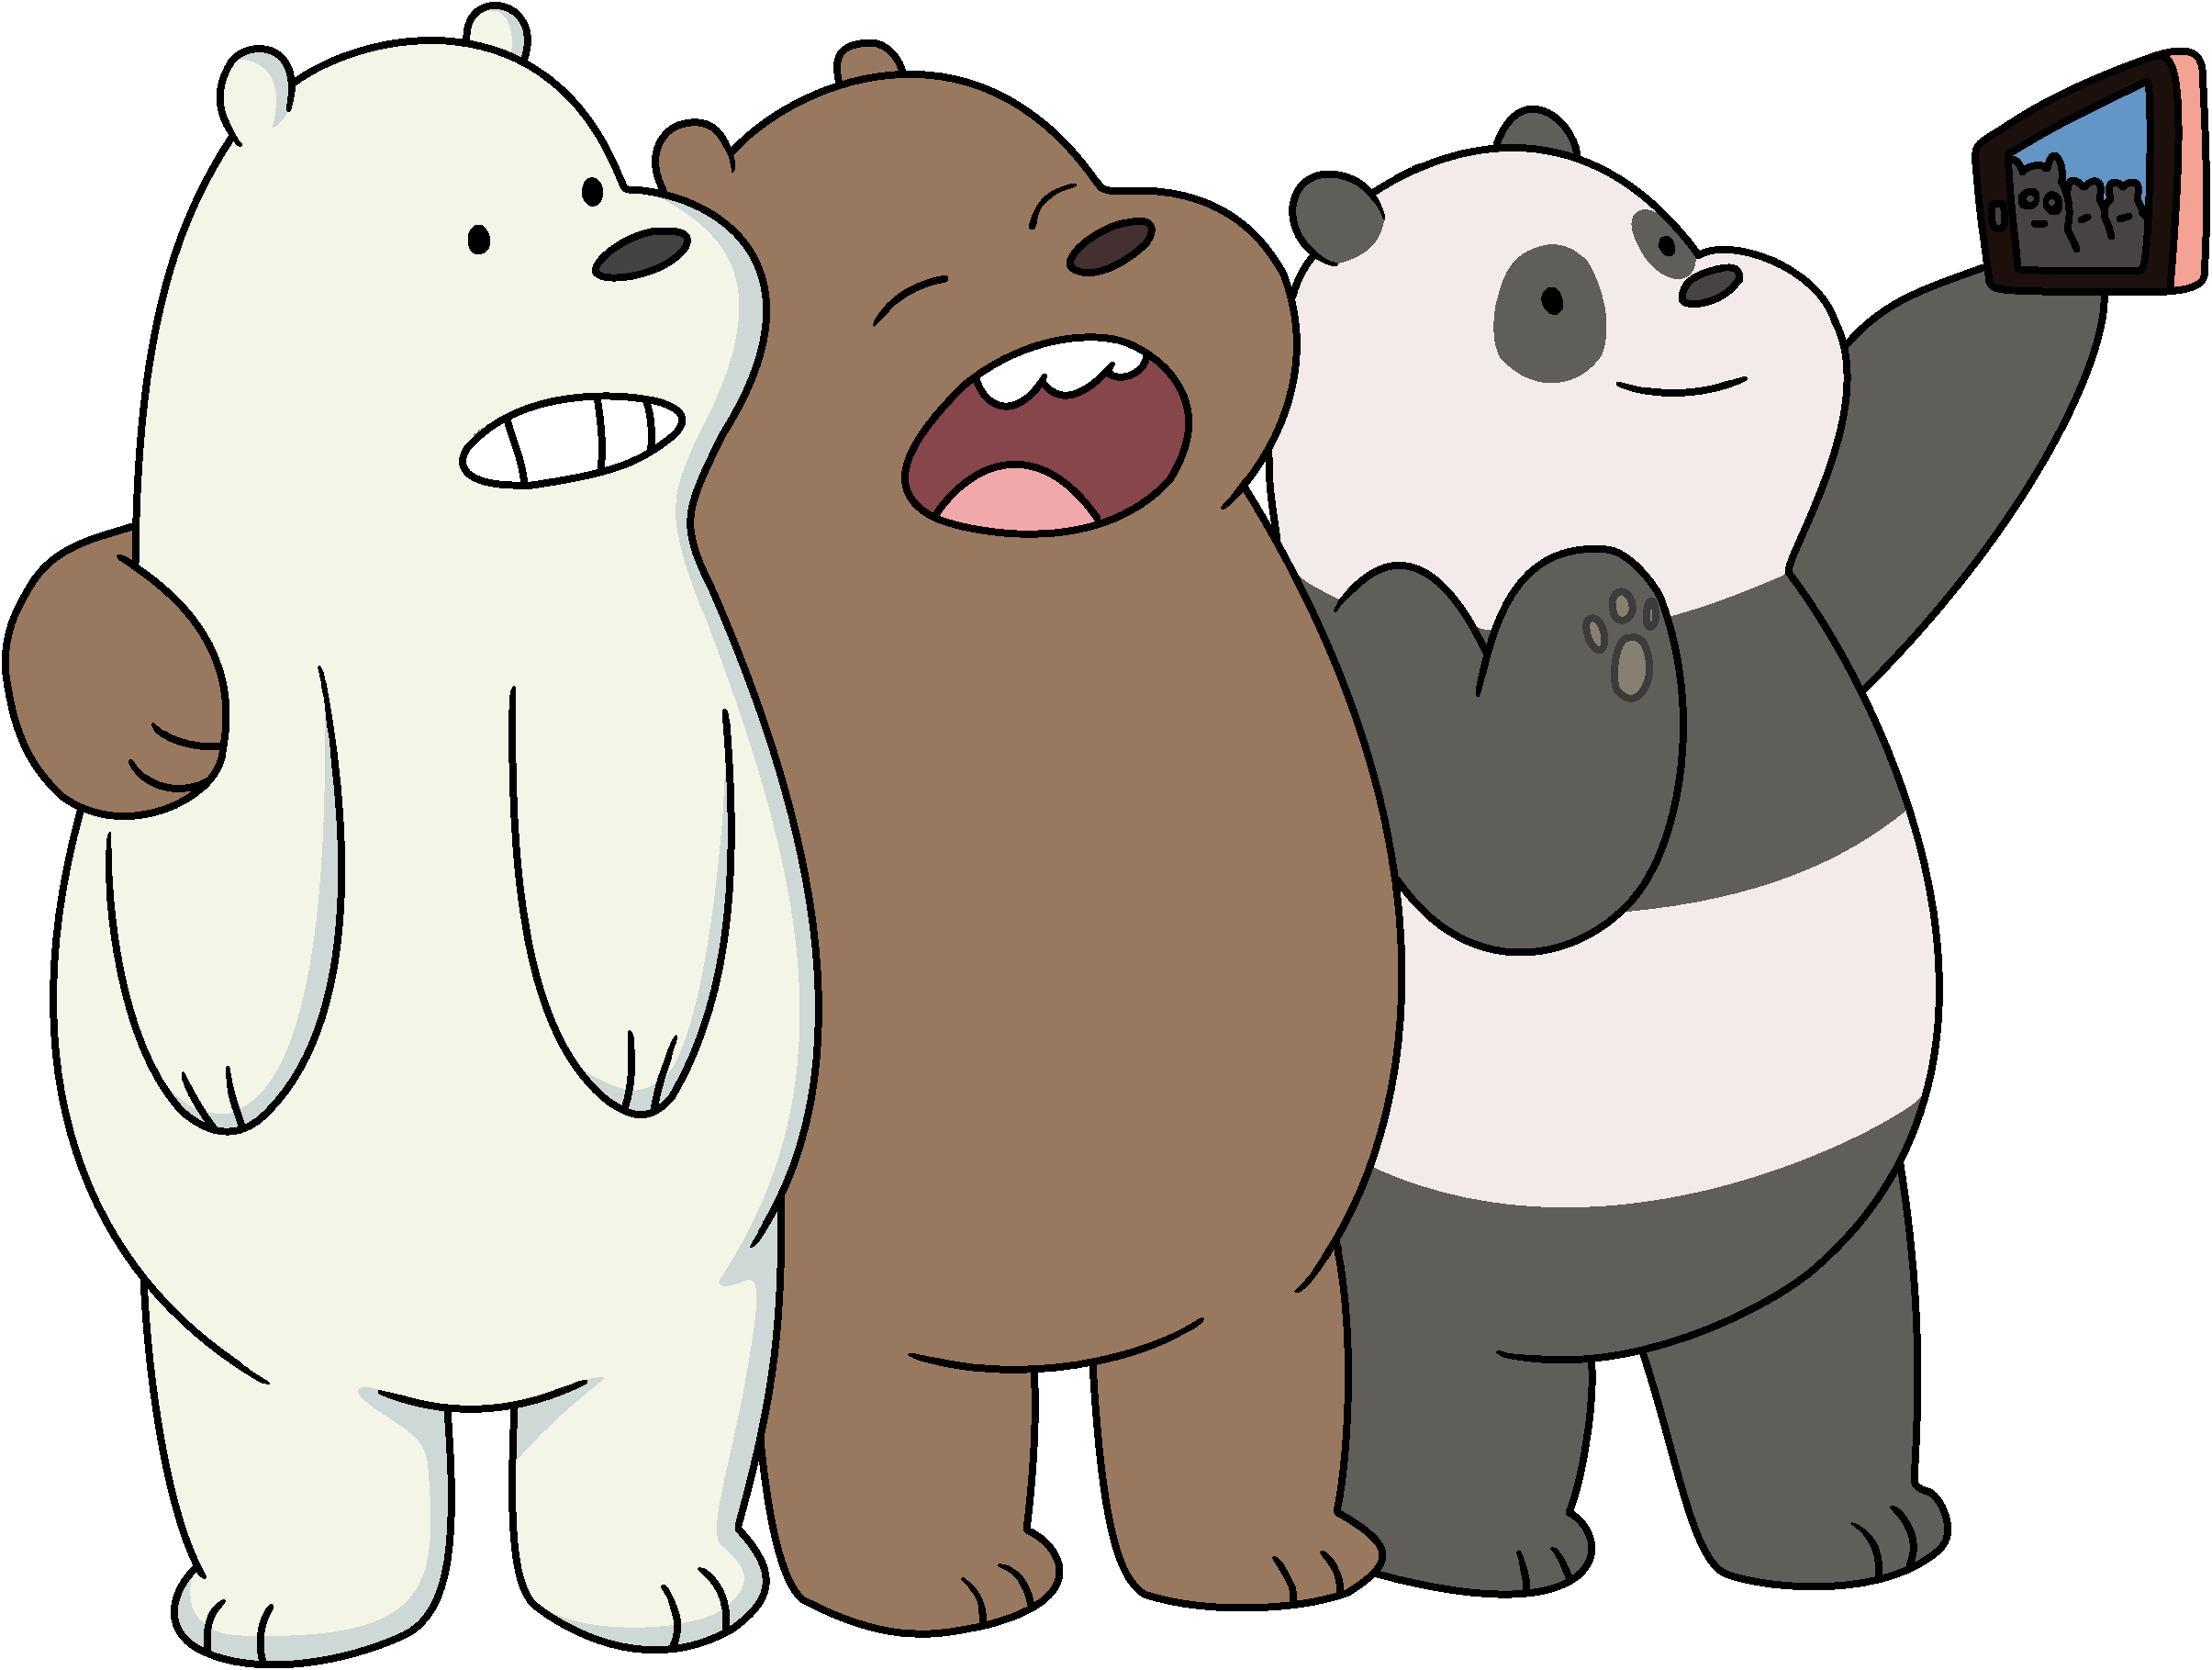 Three bears standing together taking a picture - We Bare Bears